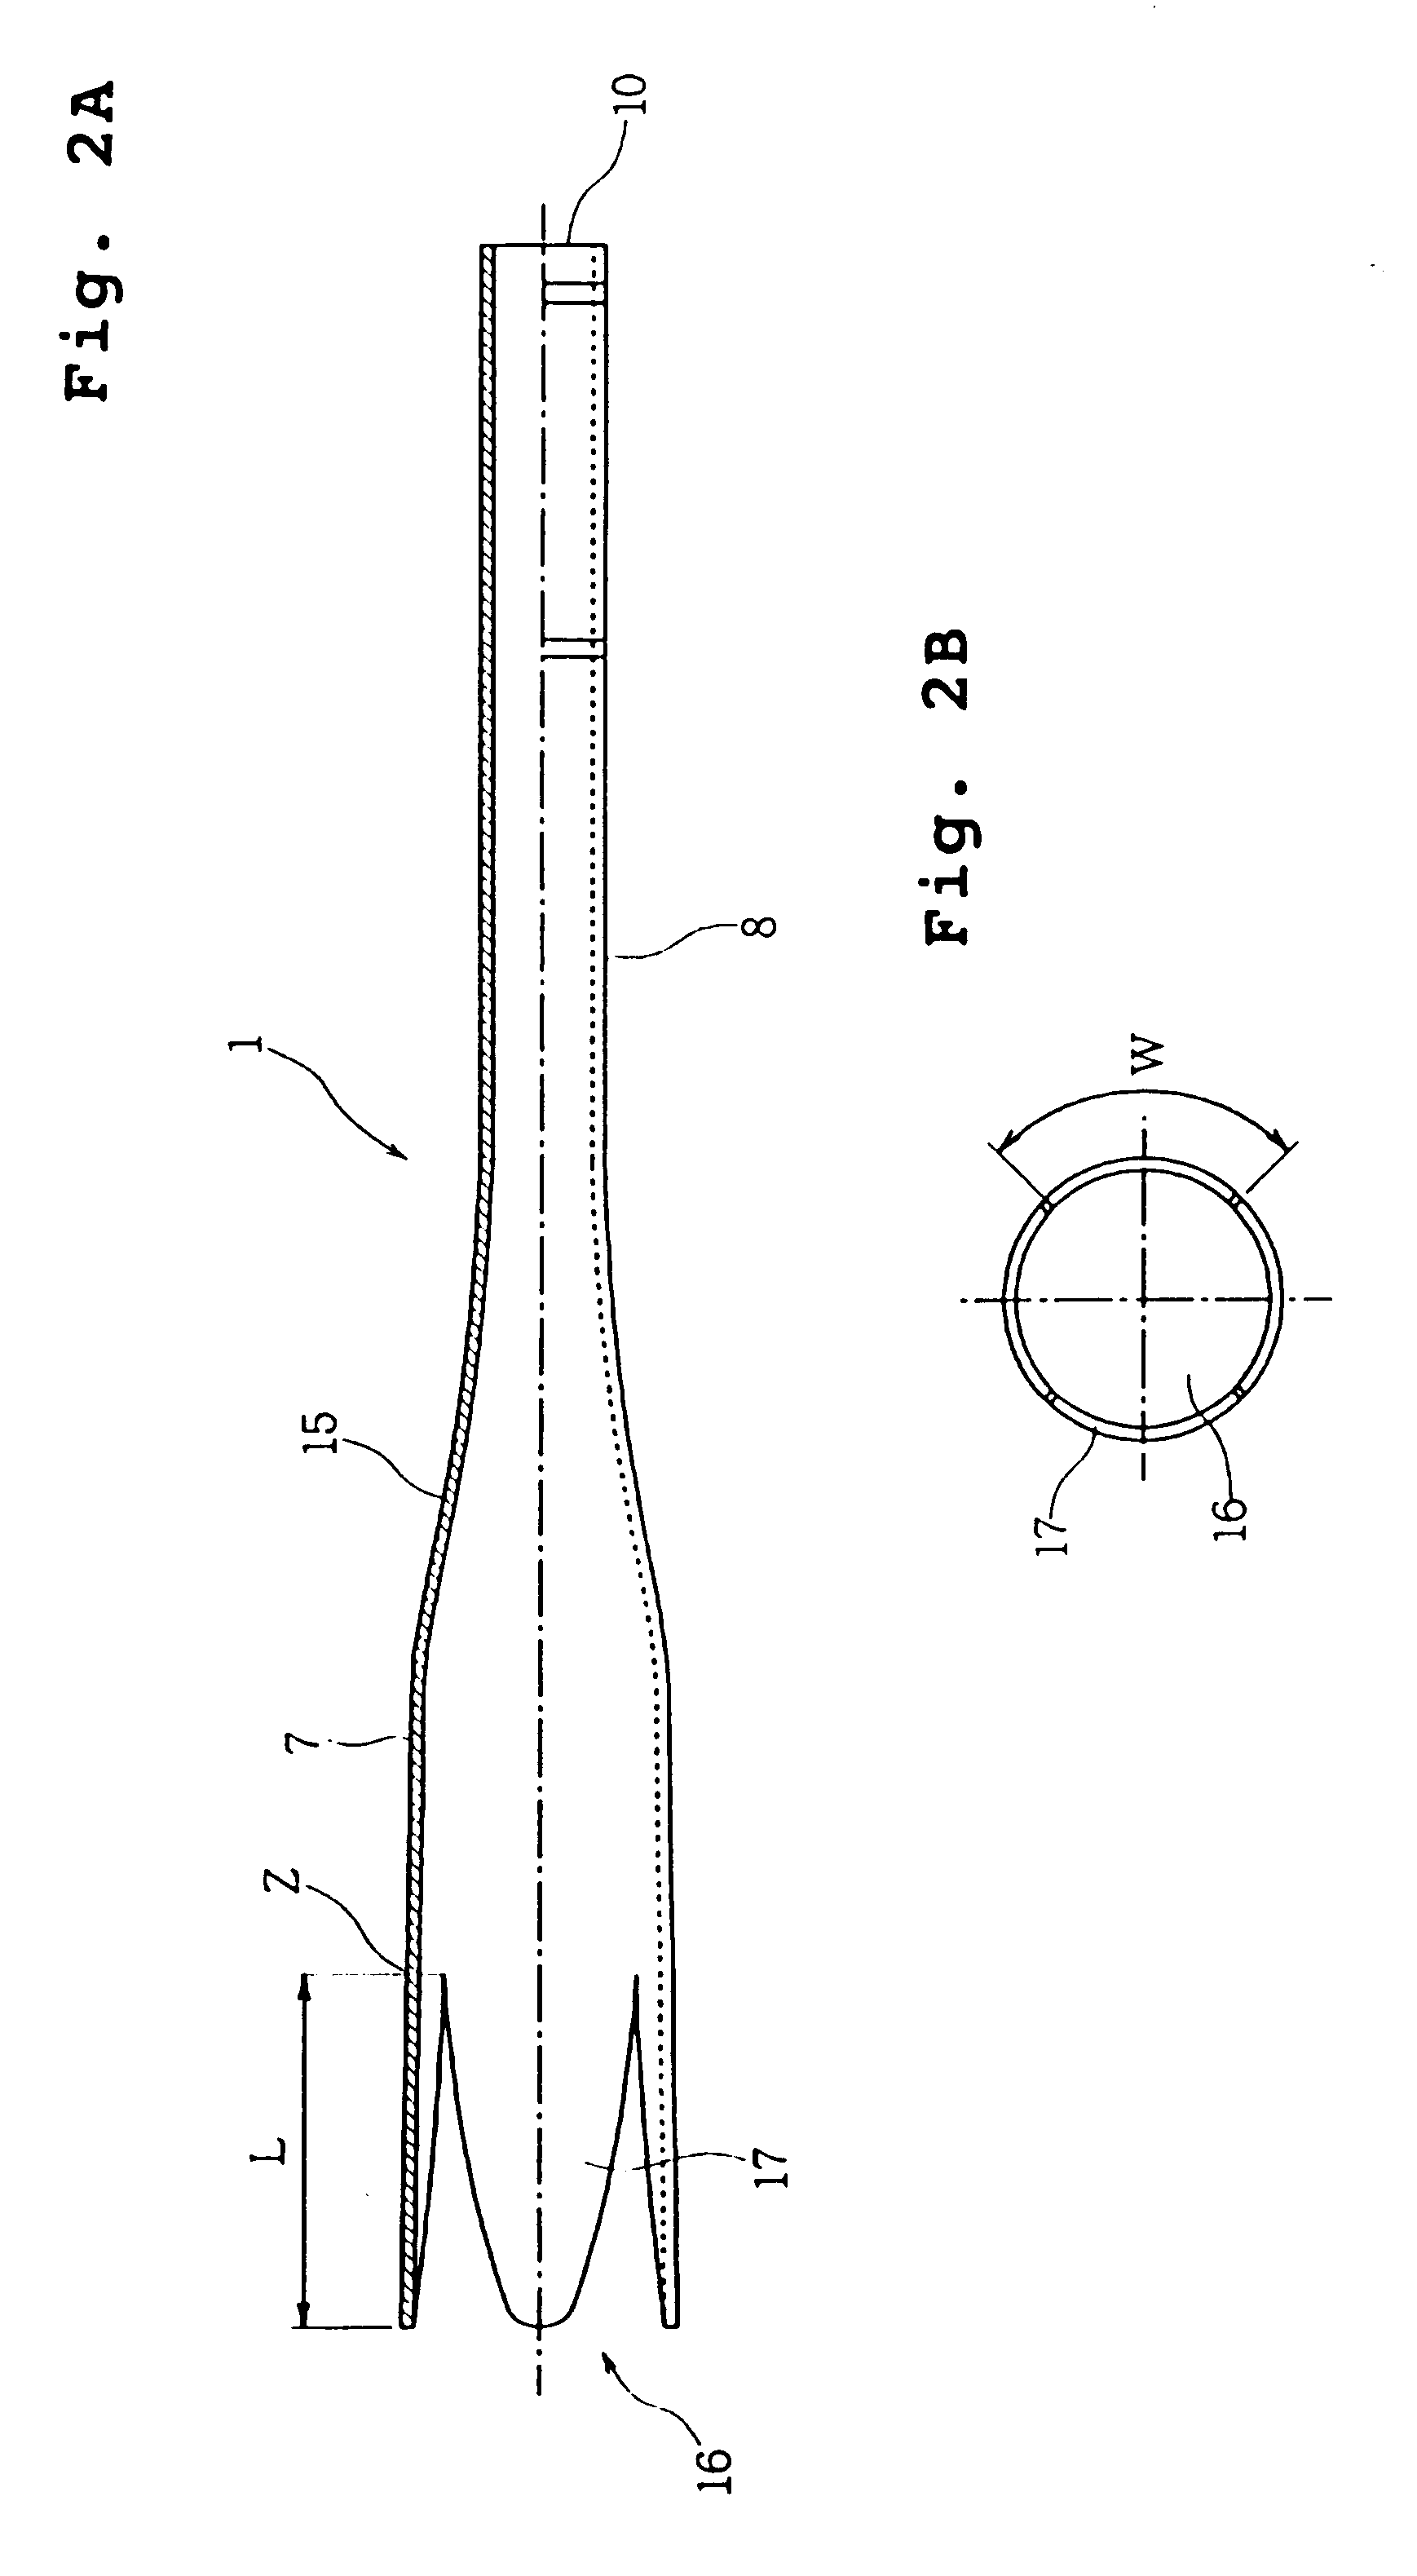 Applicator for tampons